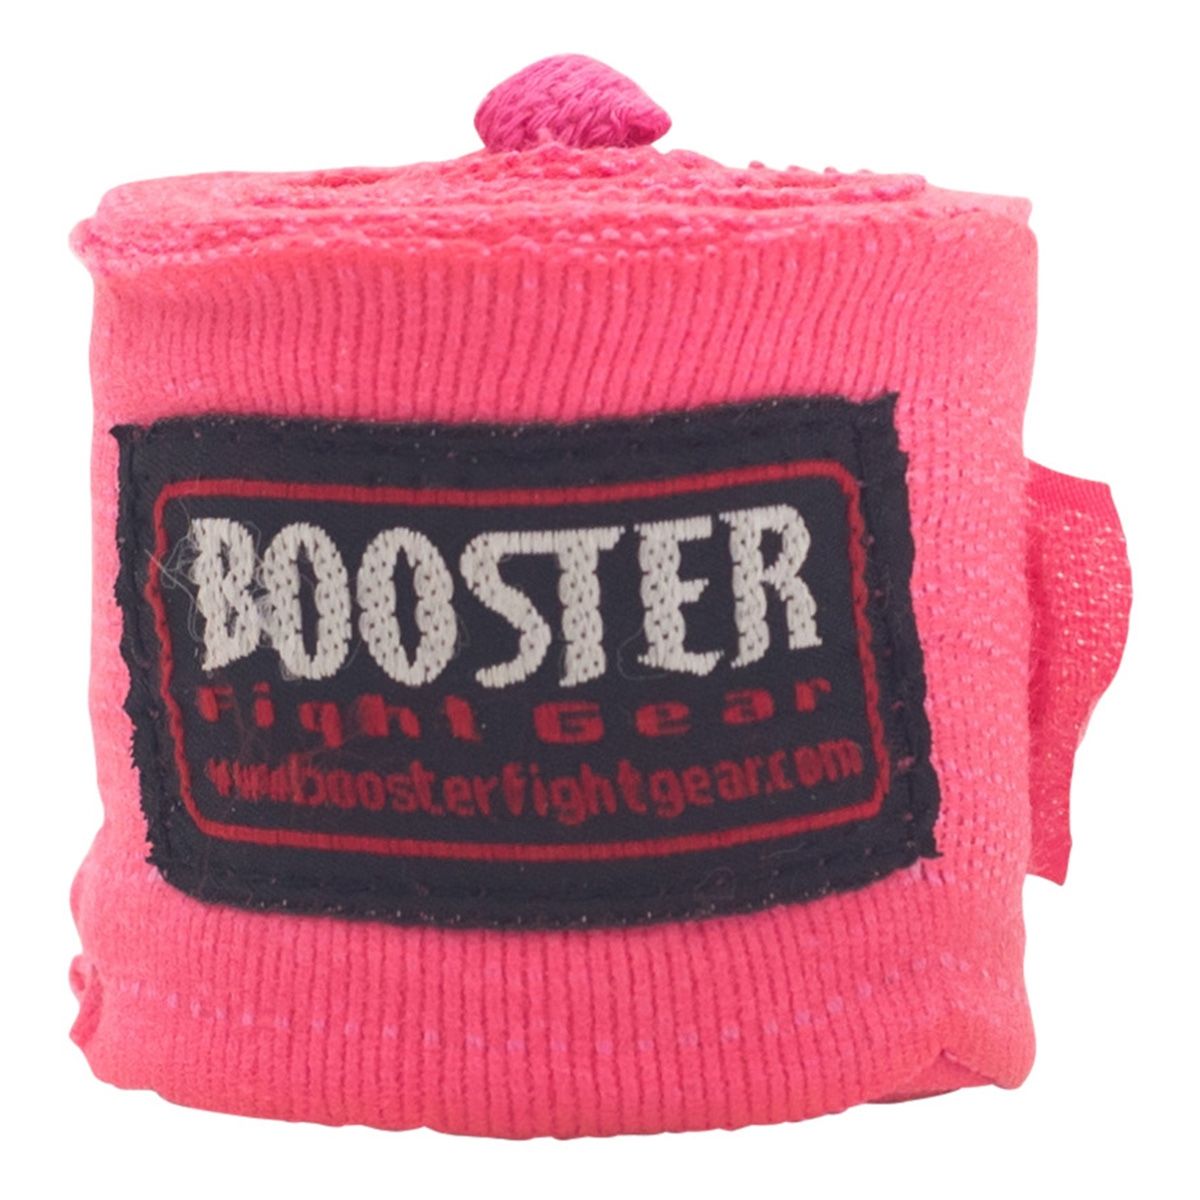 Booster Fightgear - bandages - BPC PINK